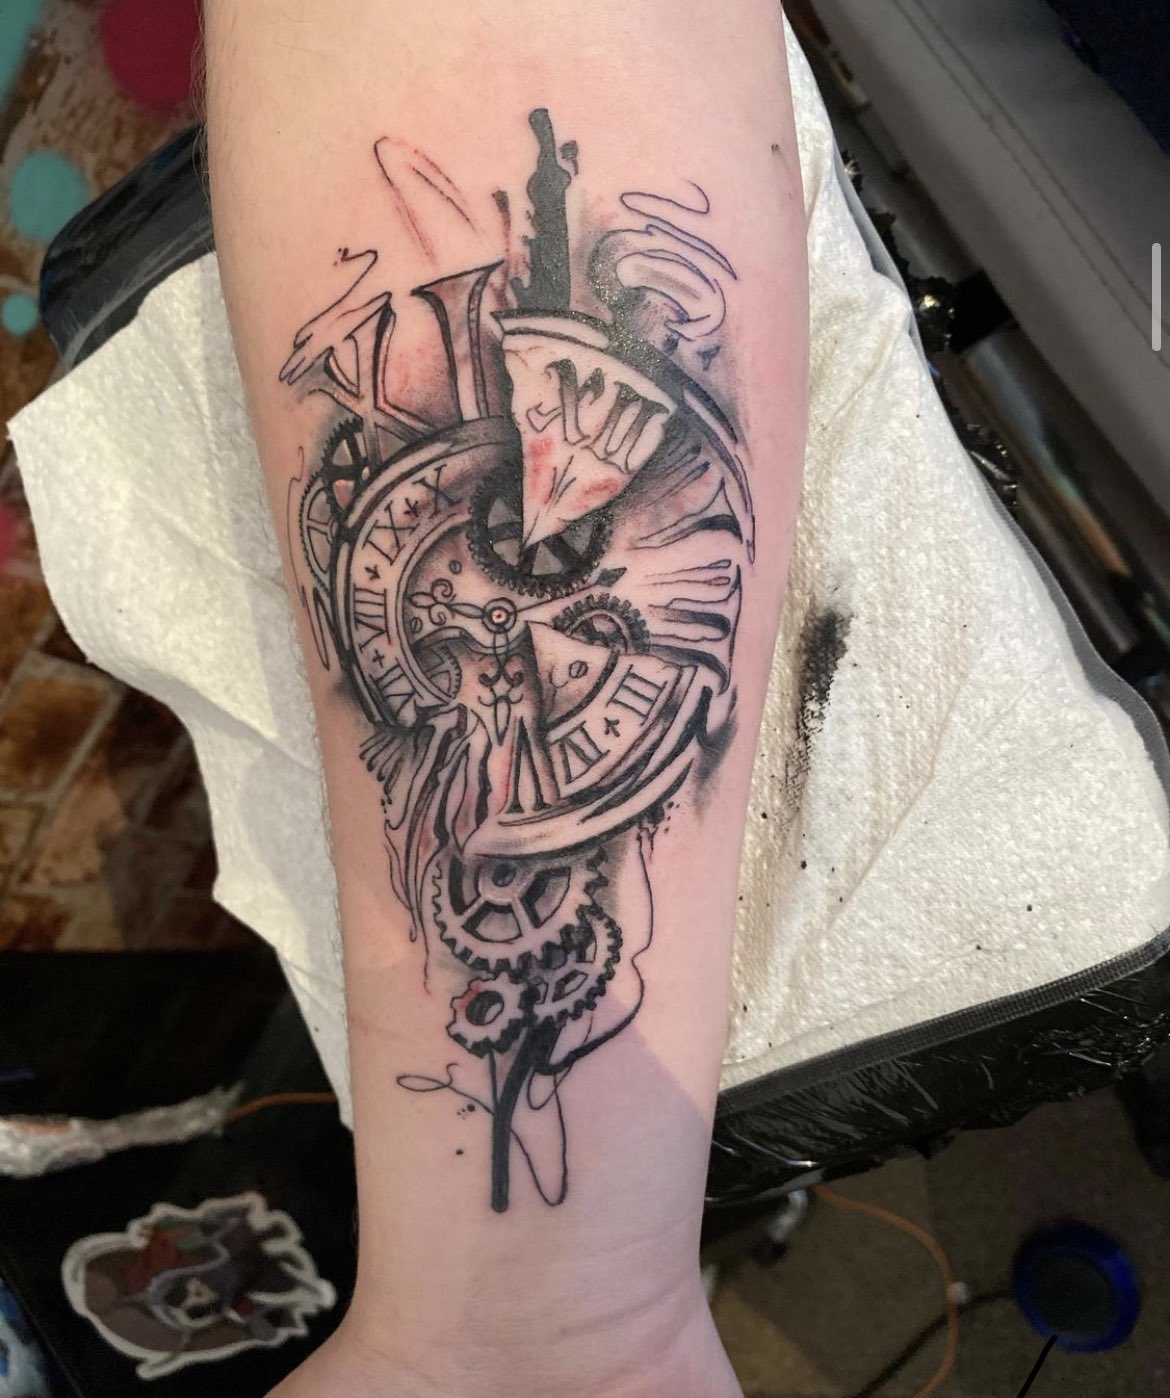 Dotwork Broken Clock With Falling Pieces From Tattoo Idea  BlackInk AI